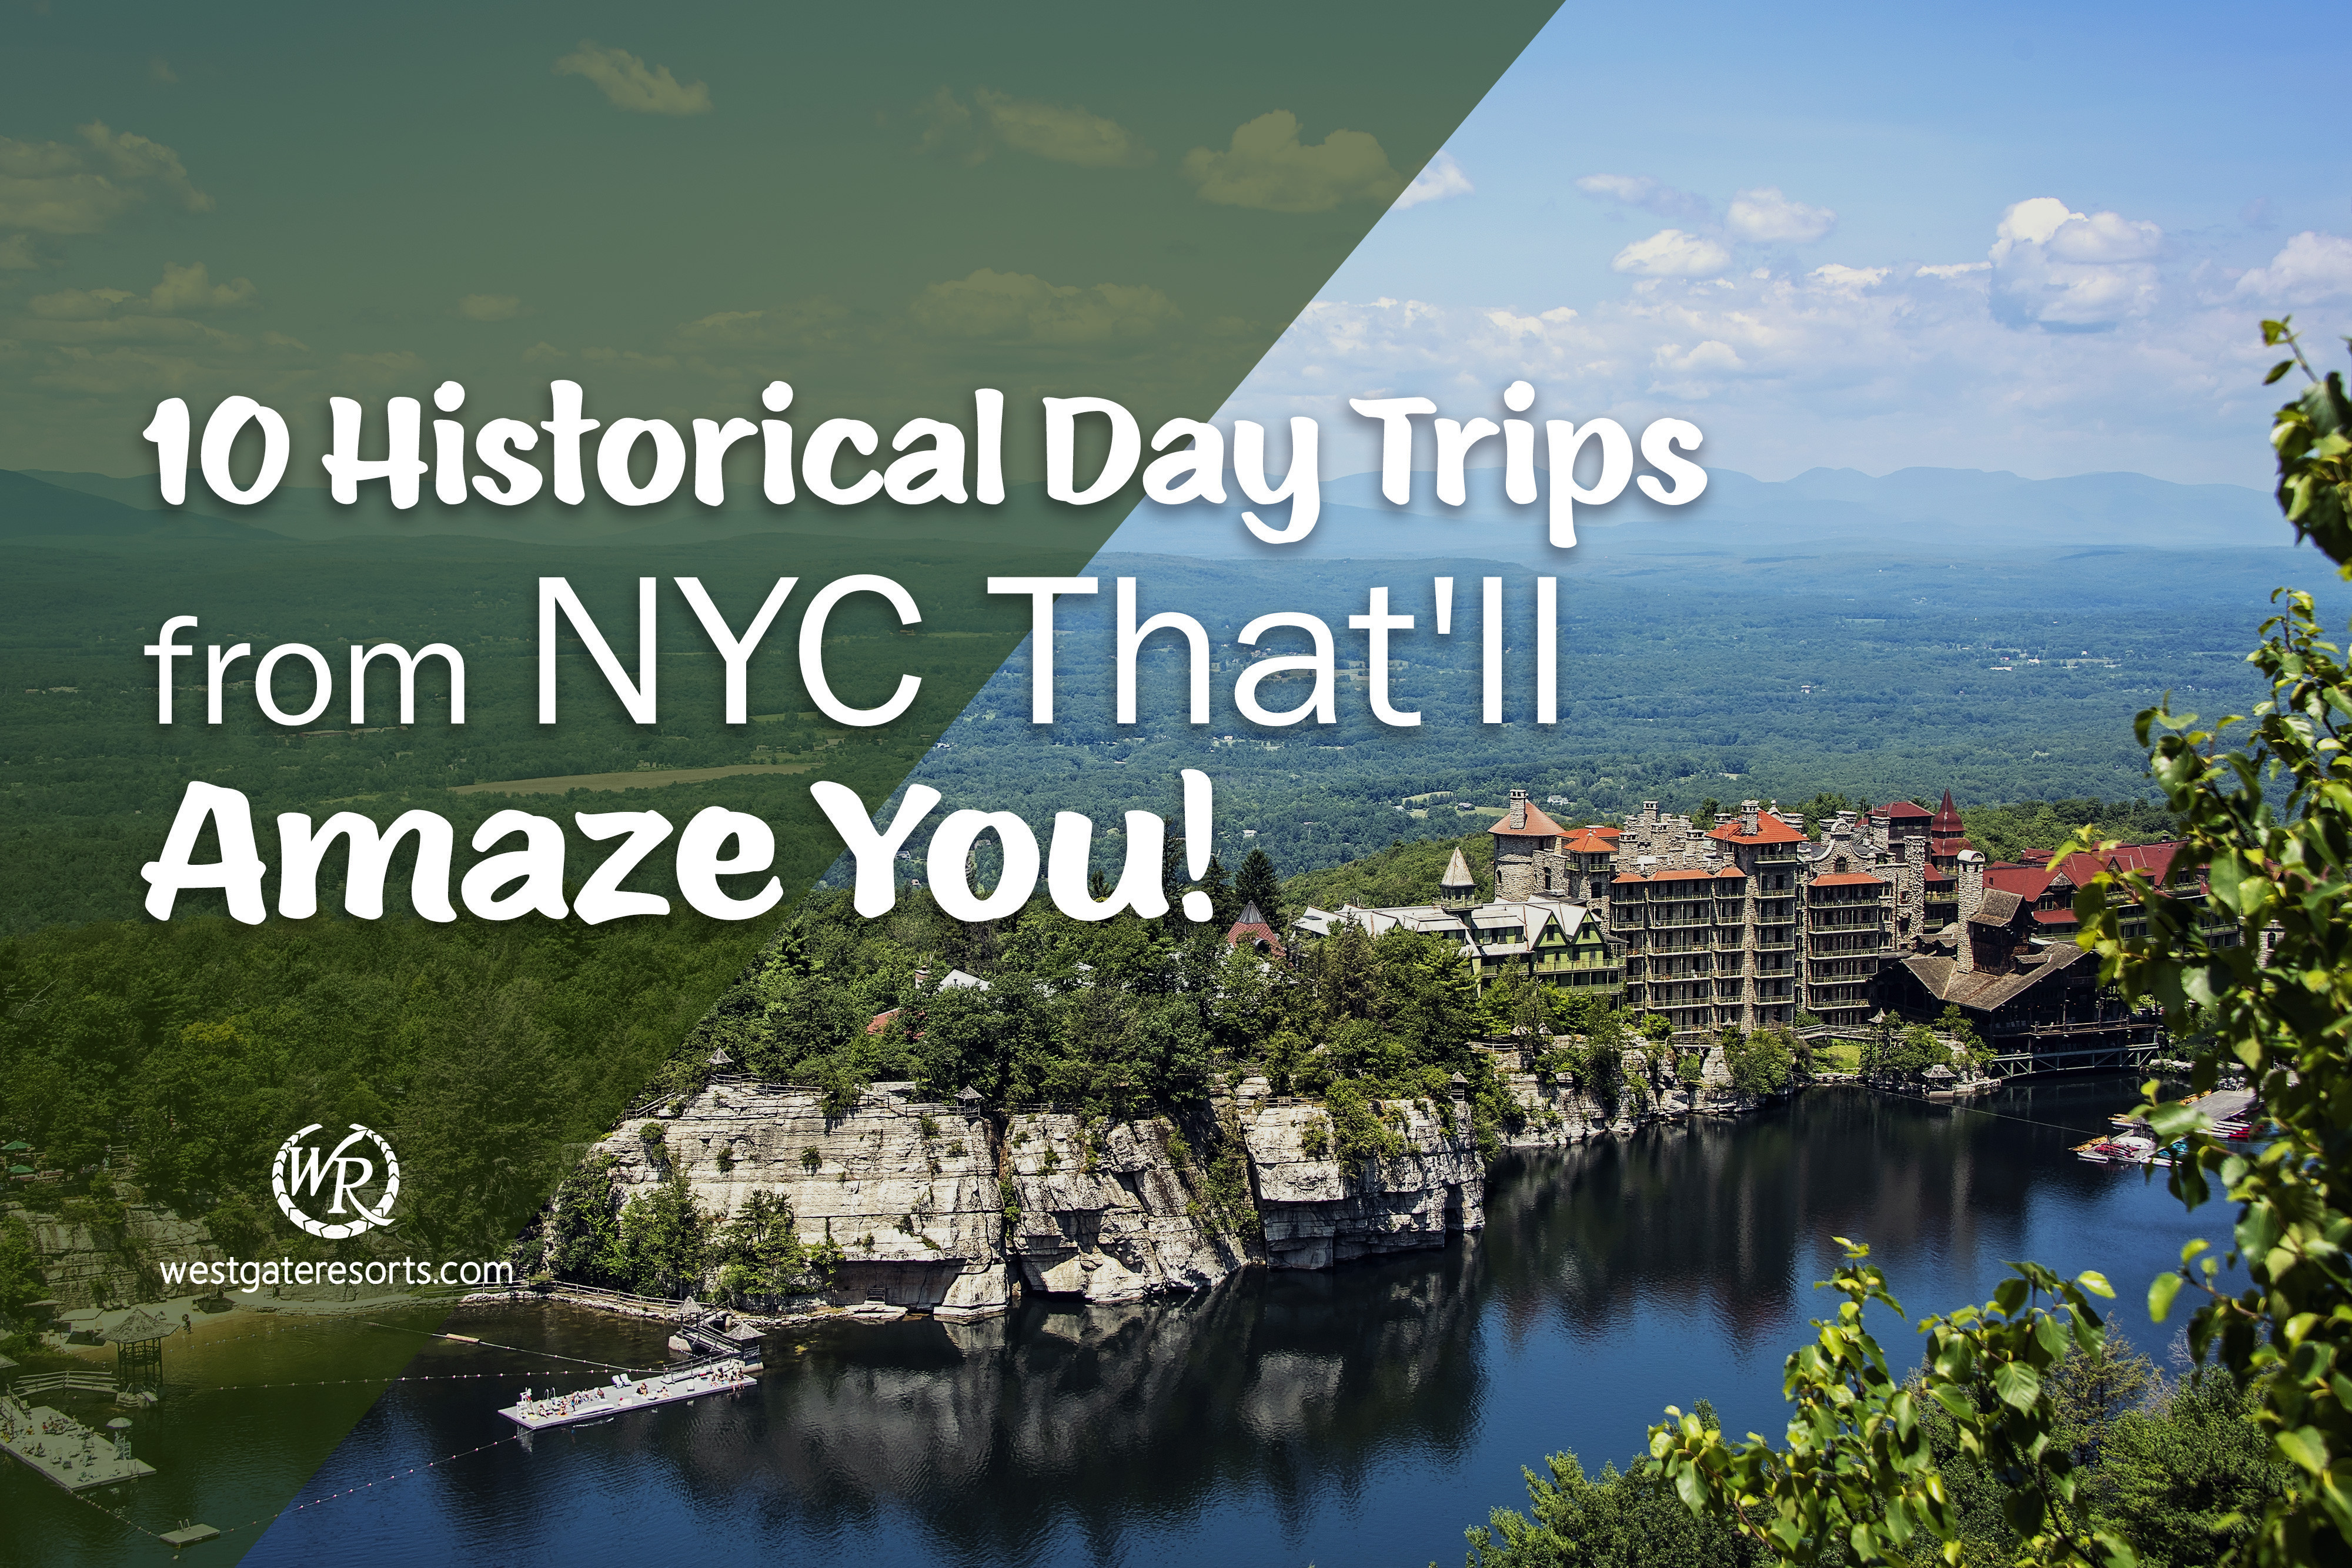 10 Historical Day Trips from NYC That'll Amaze You